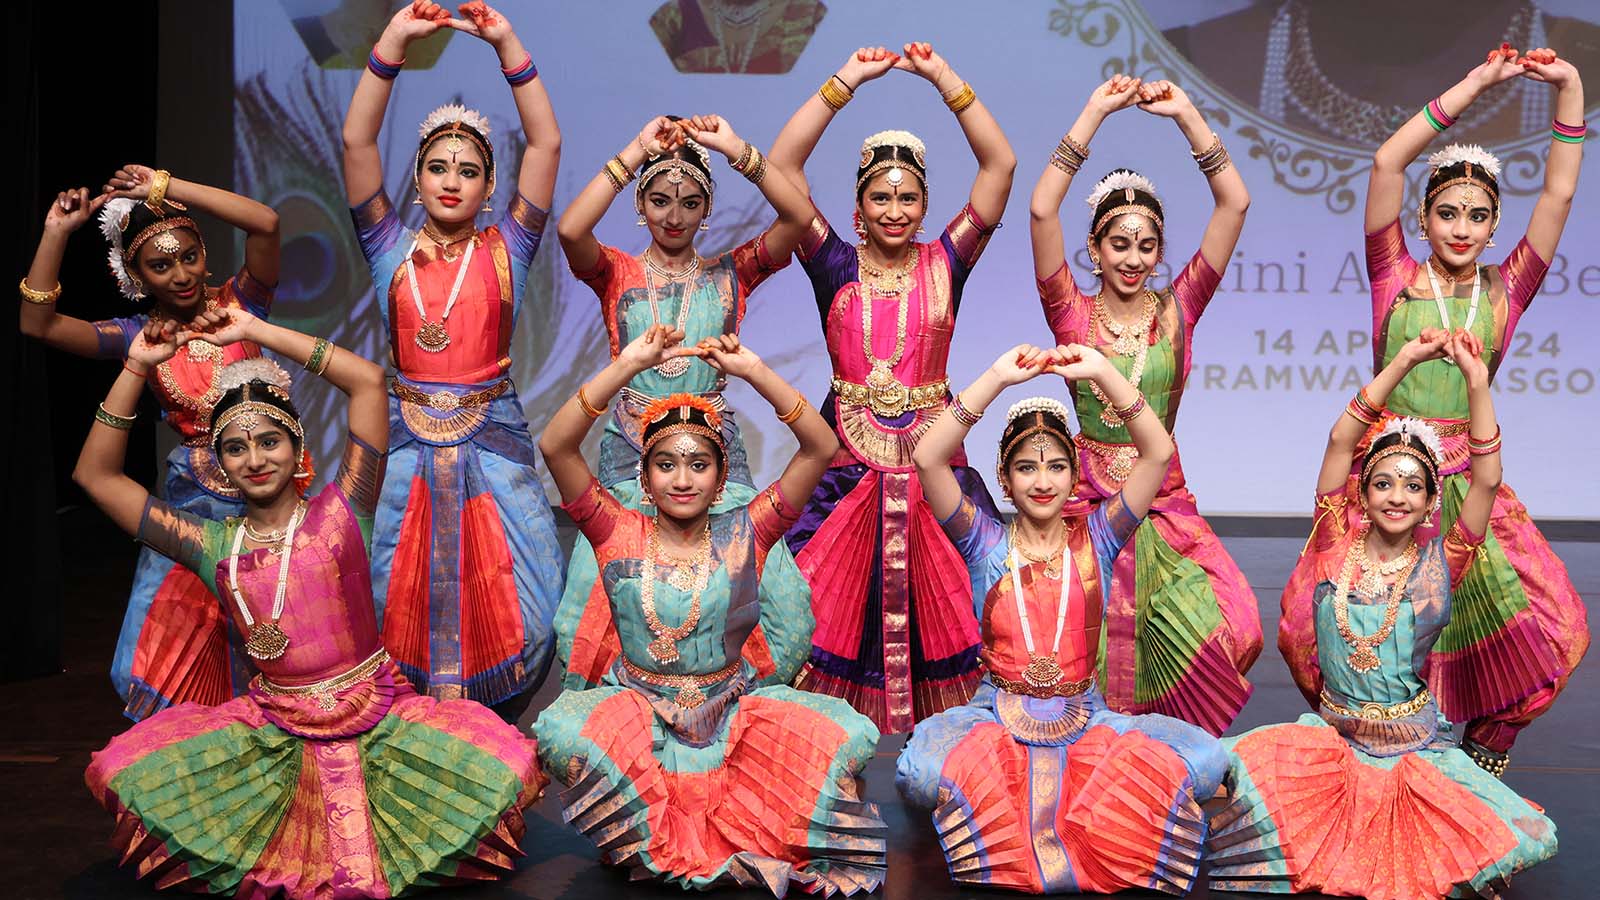 A group of young girls in traditional Indian dress pose together on a stage, smiling and with their hands clasped together in the air